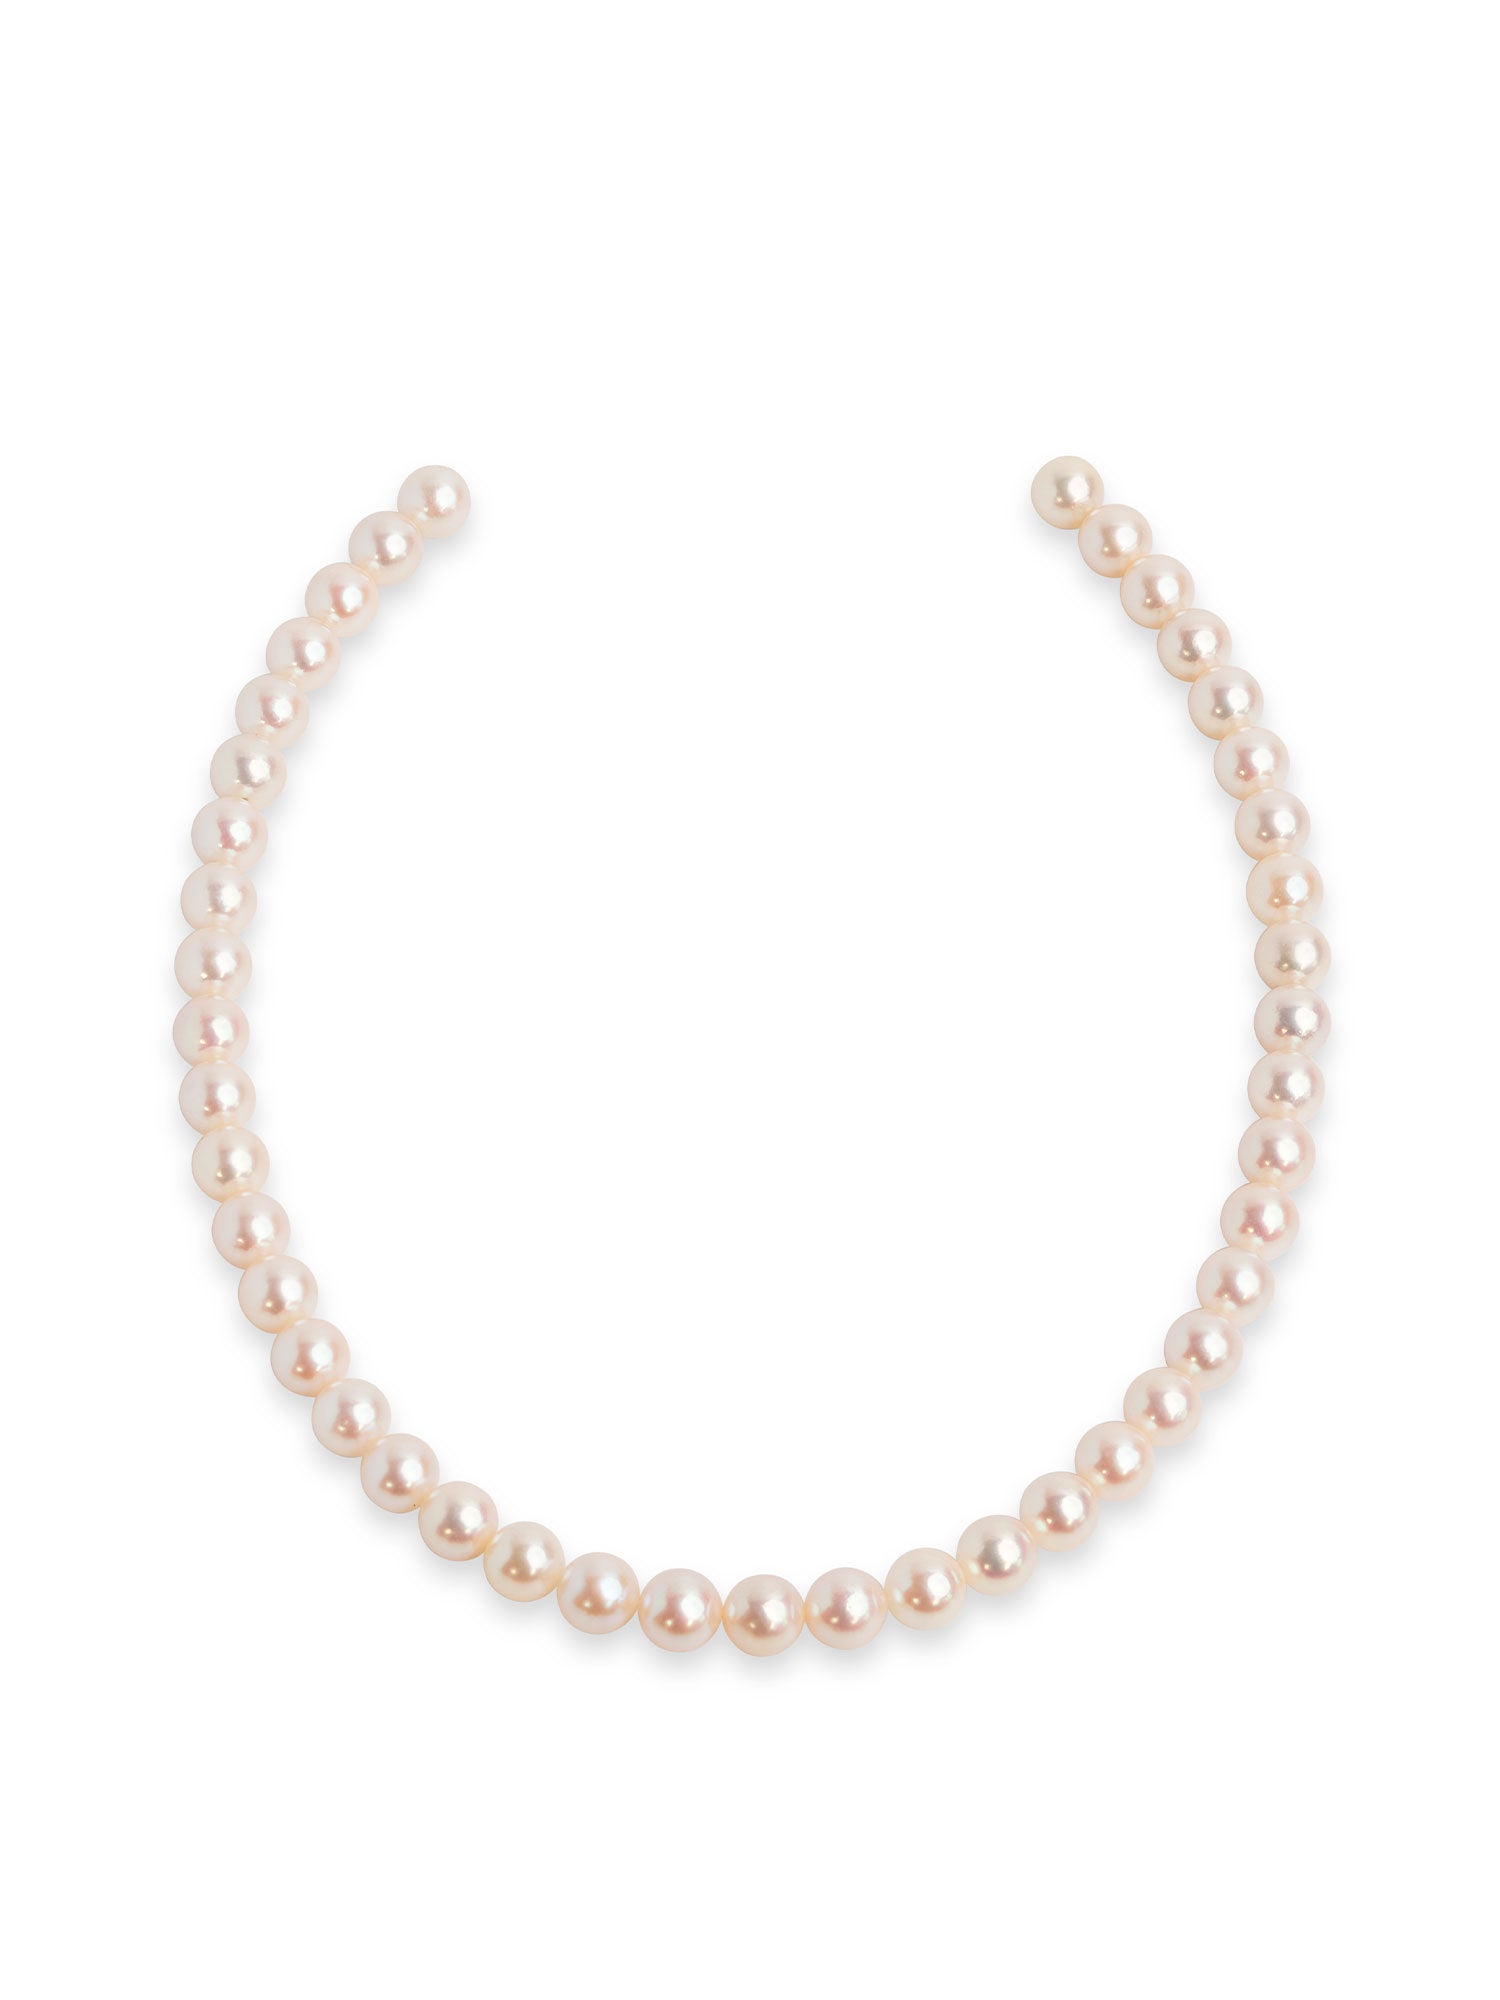 8.5 - 9 mm Japanese Akoya Cultured Pearl Necklace | 42cm